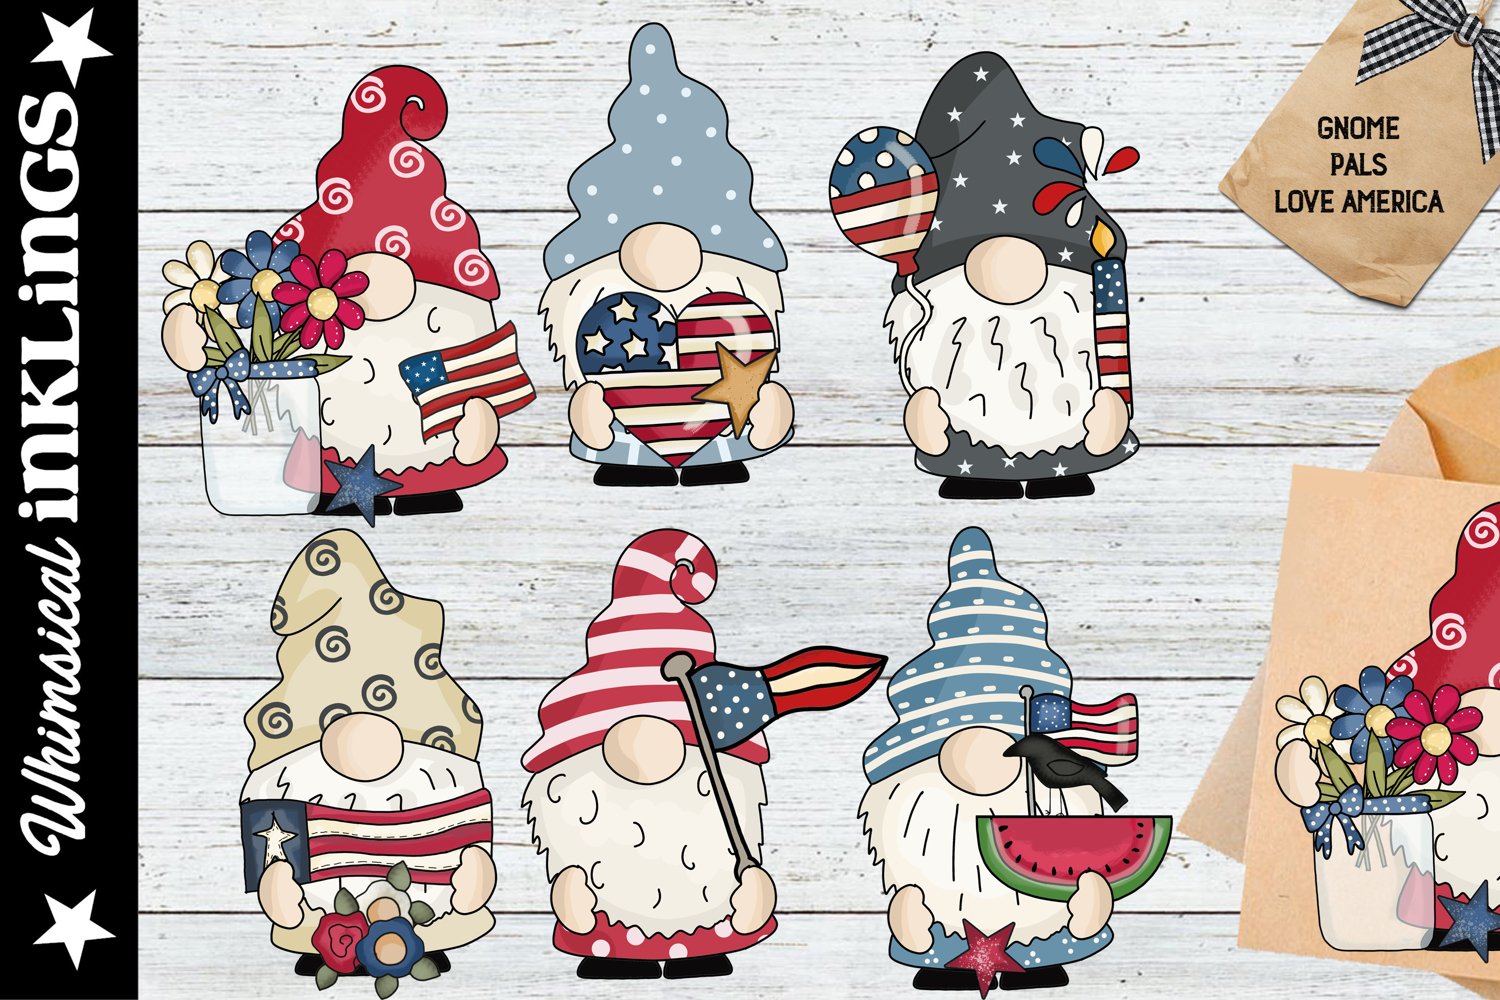 Gnome pals - American vibes.